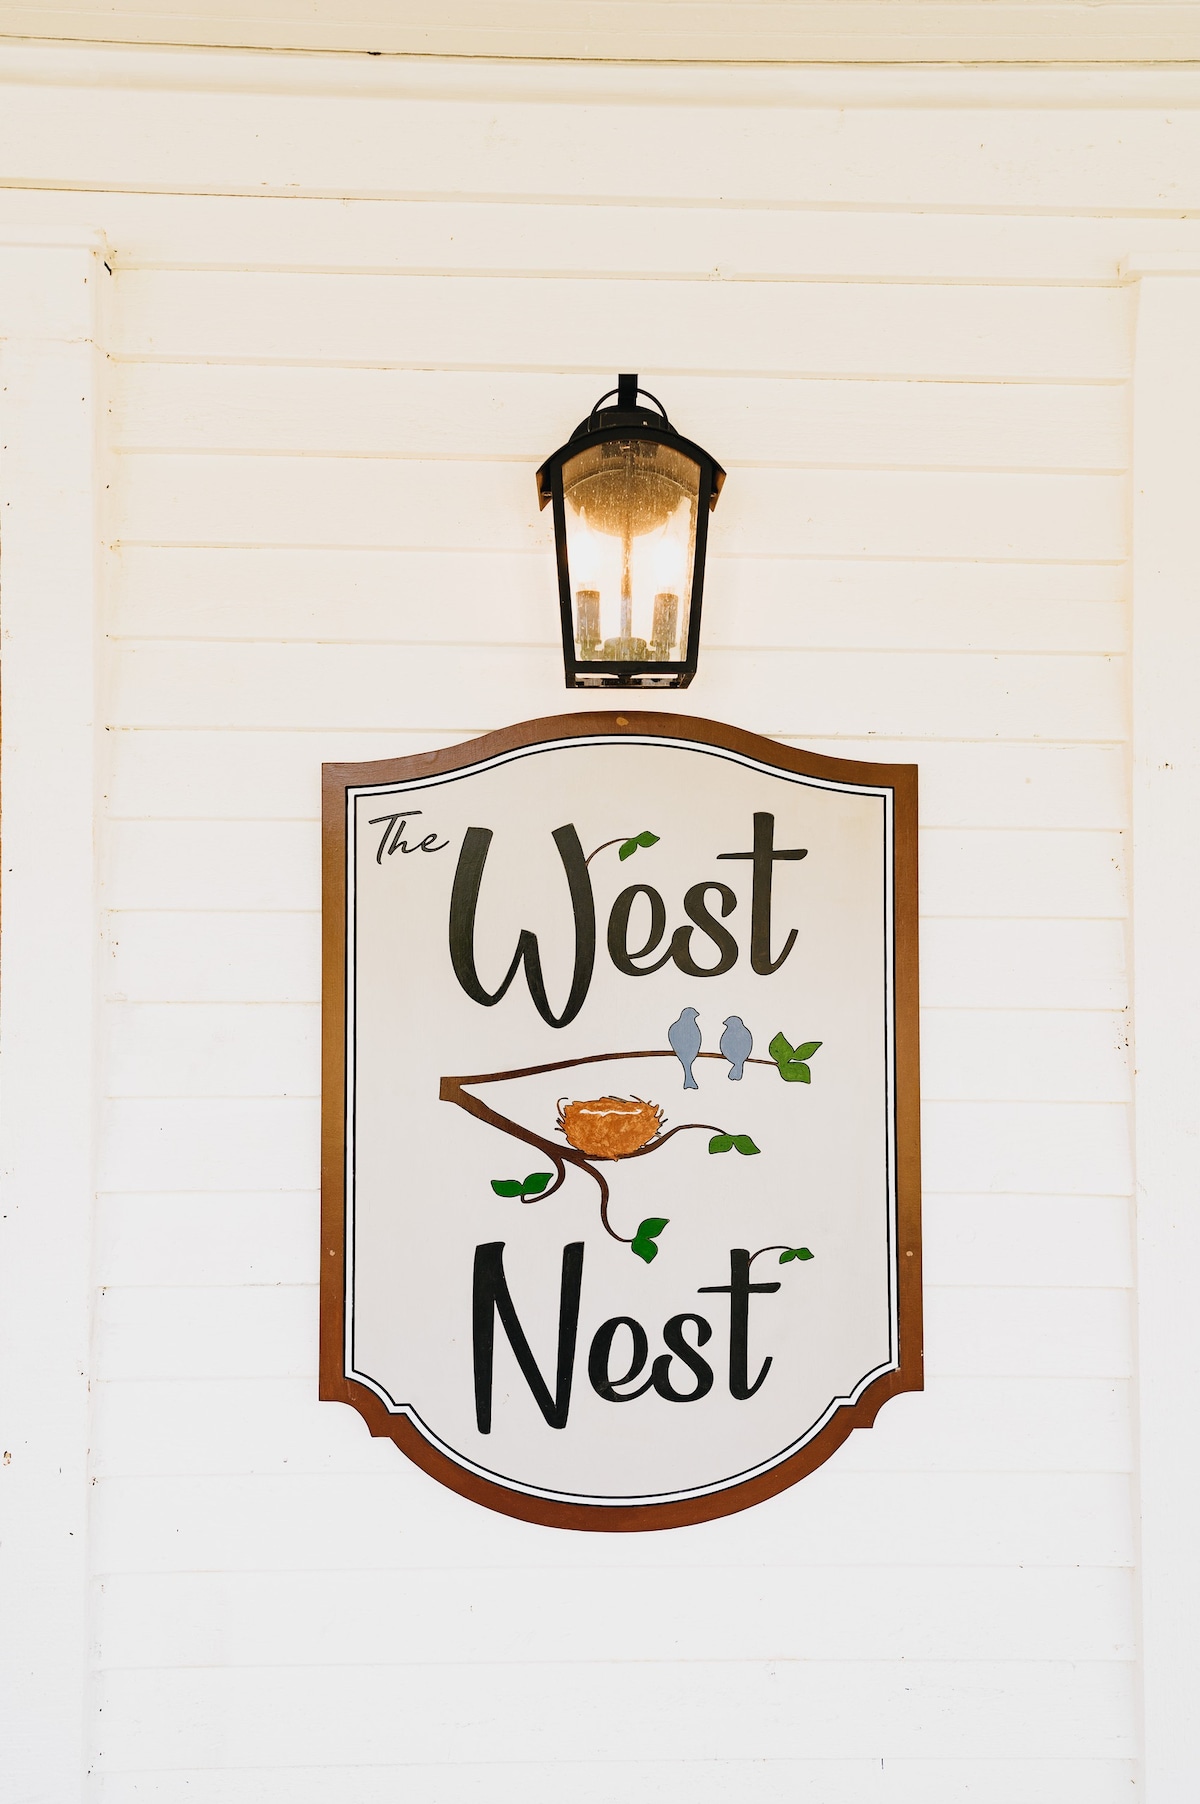 The West Nest